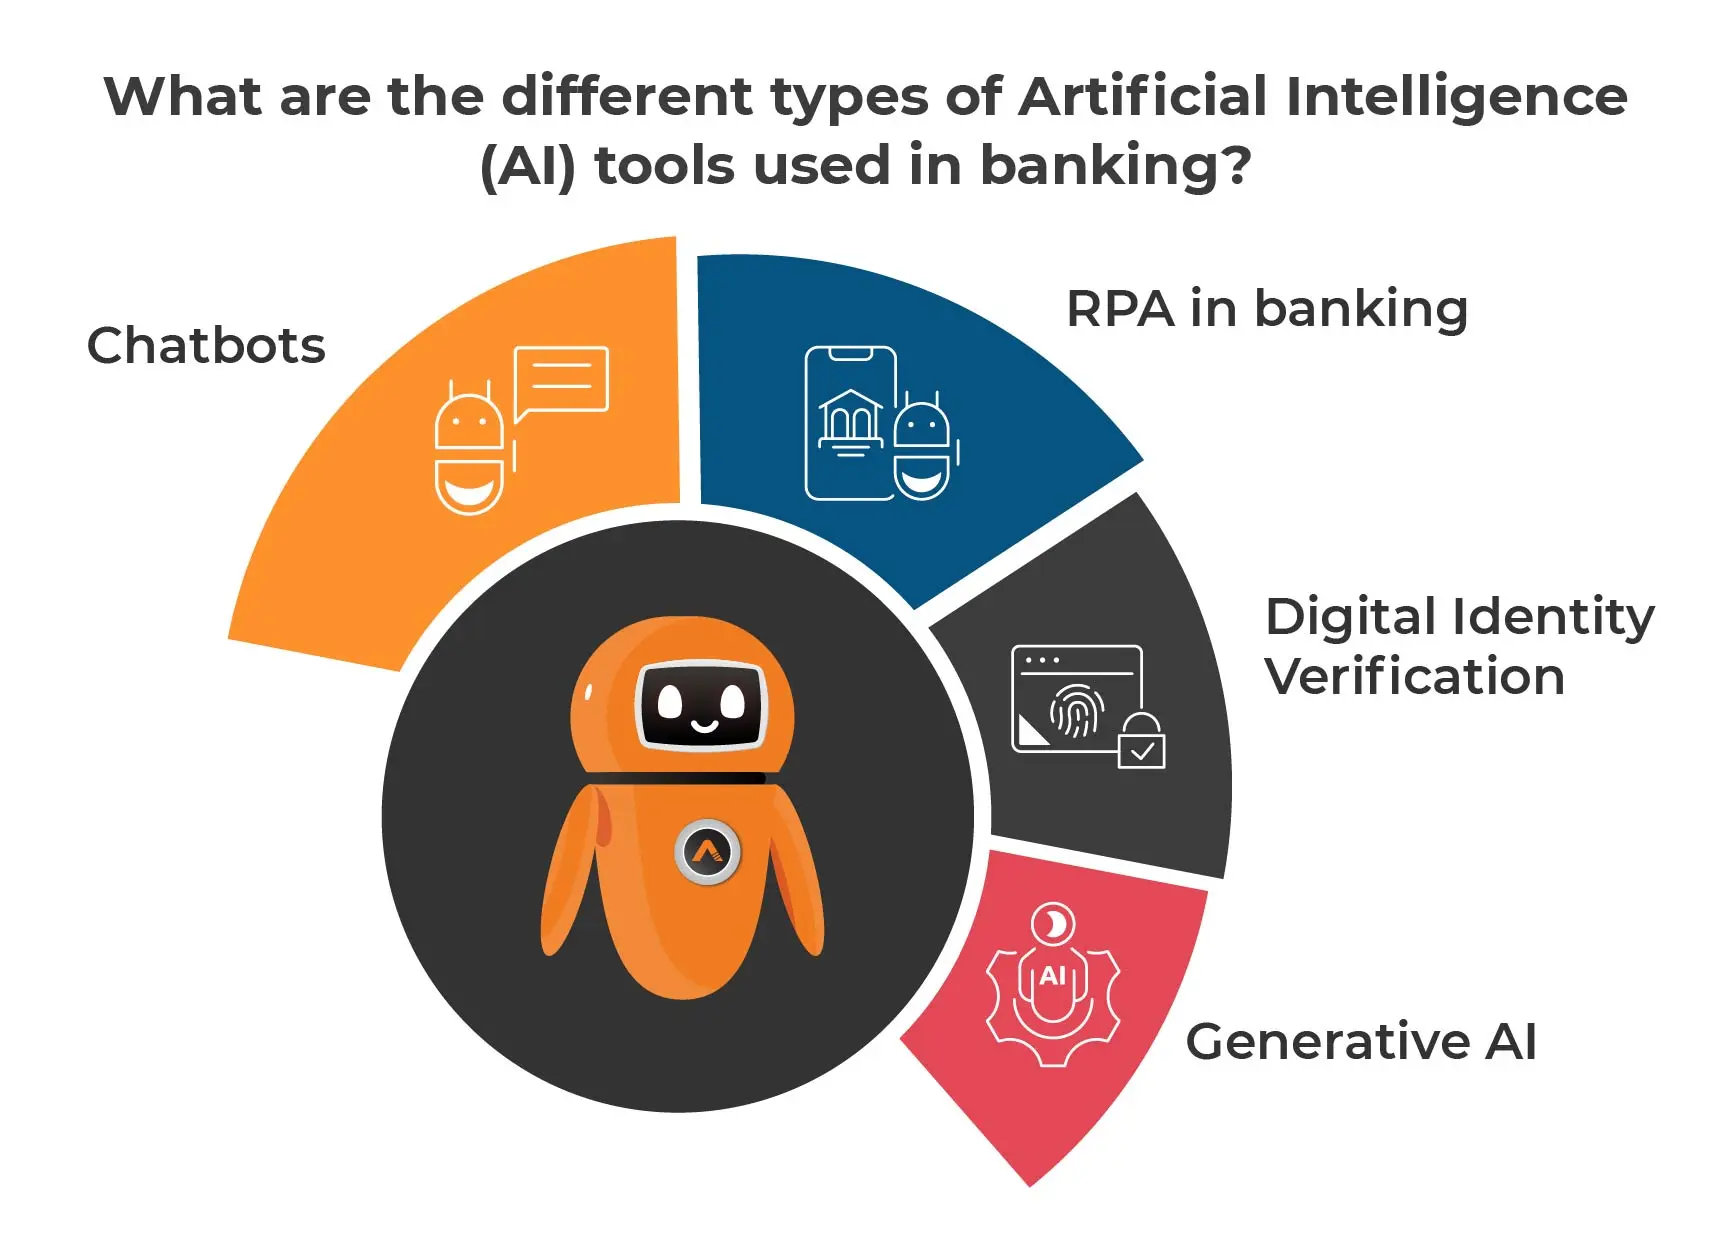 What are the different types of Artificial Intelligence (AI) tools used in banking?